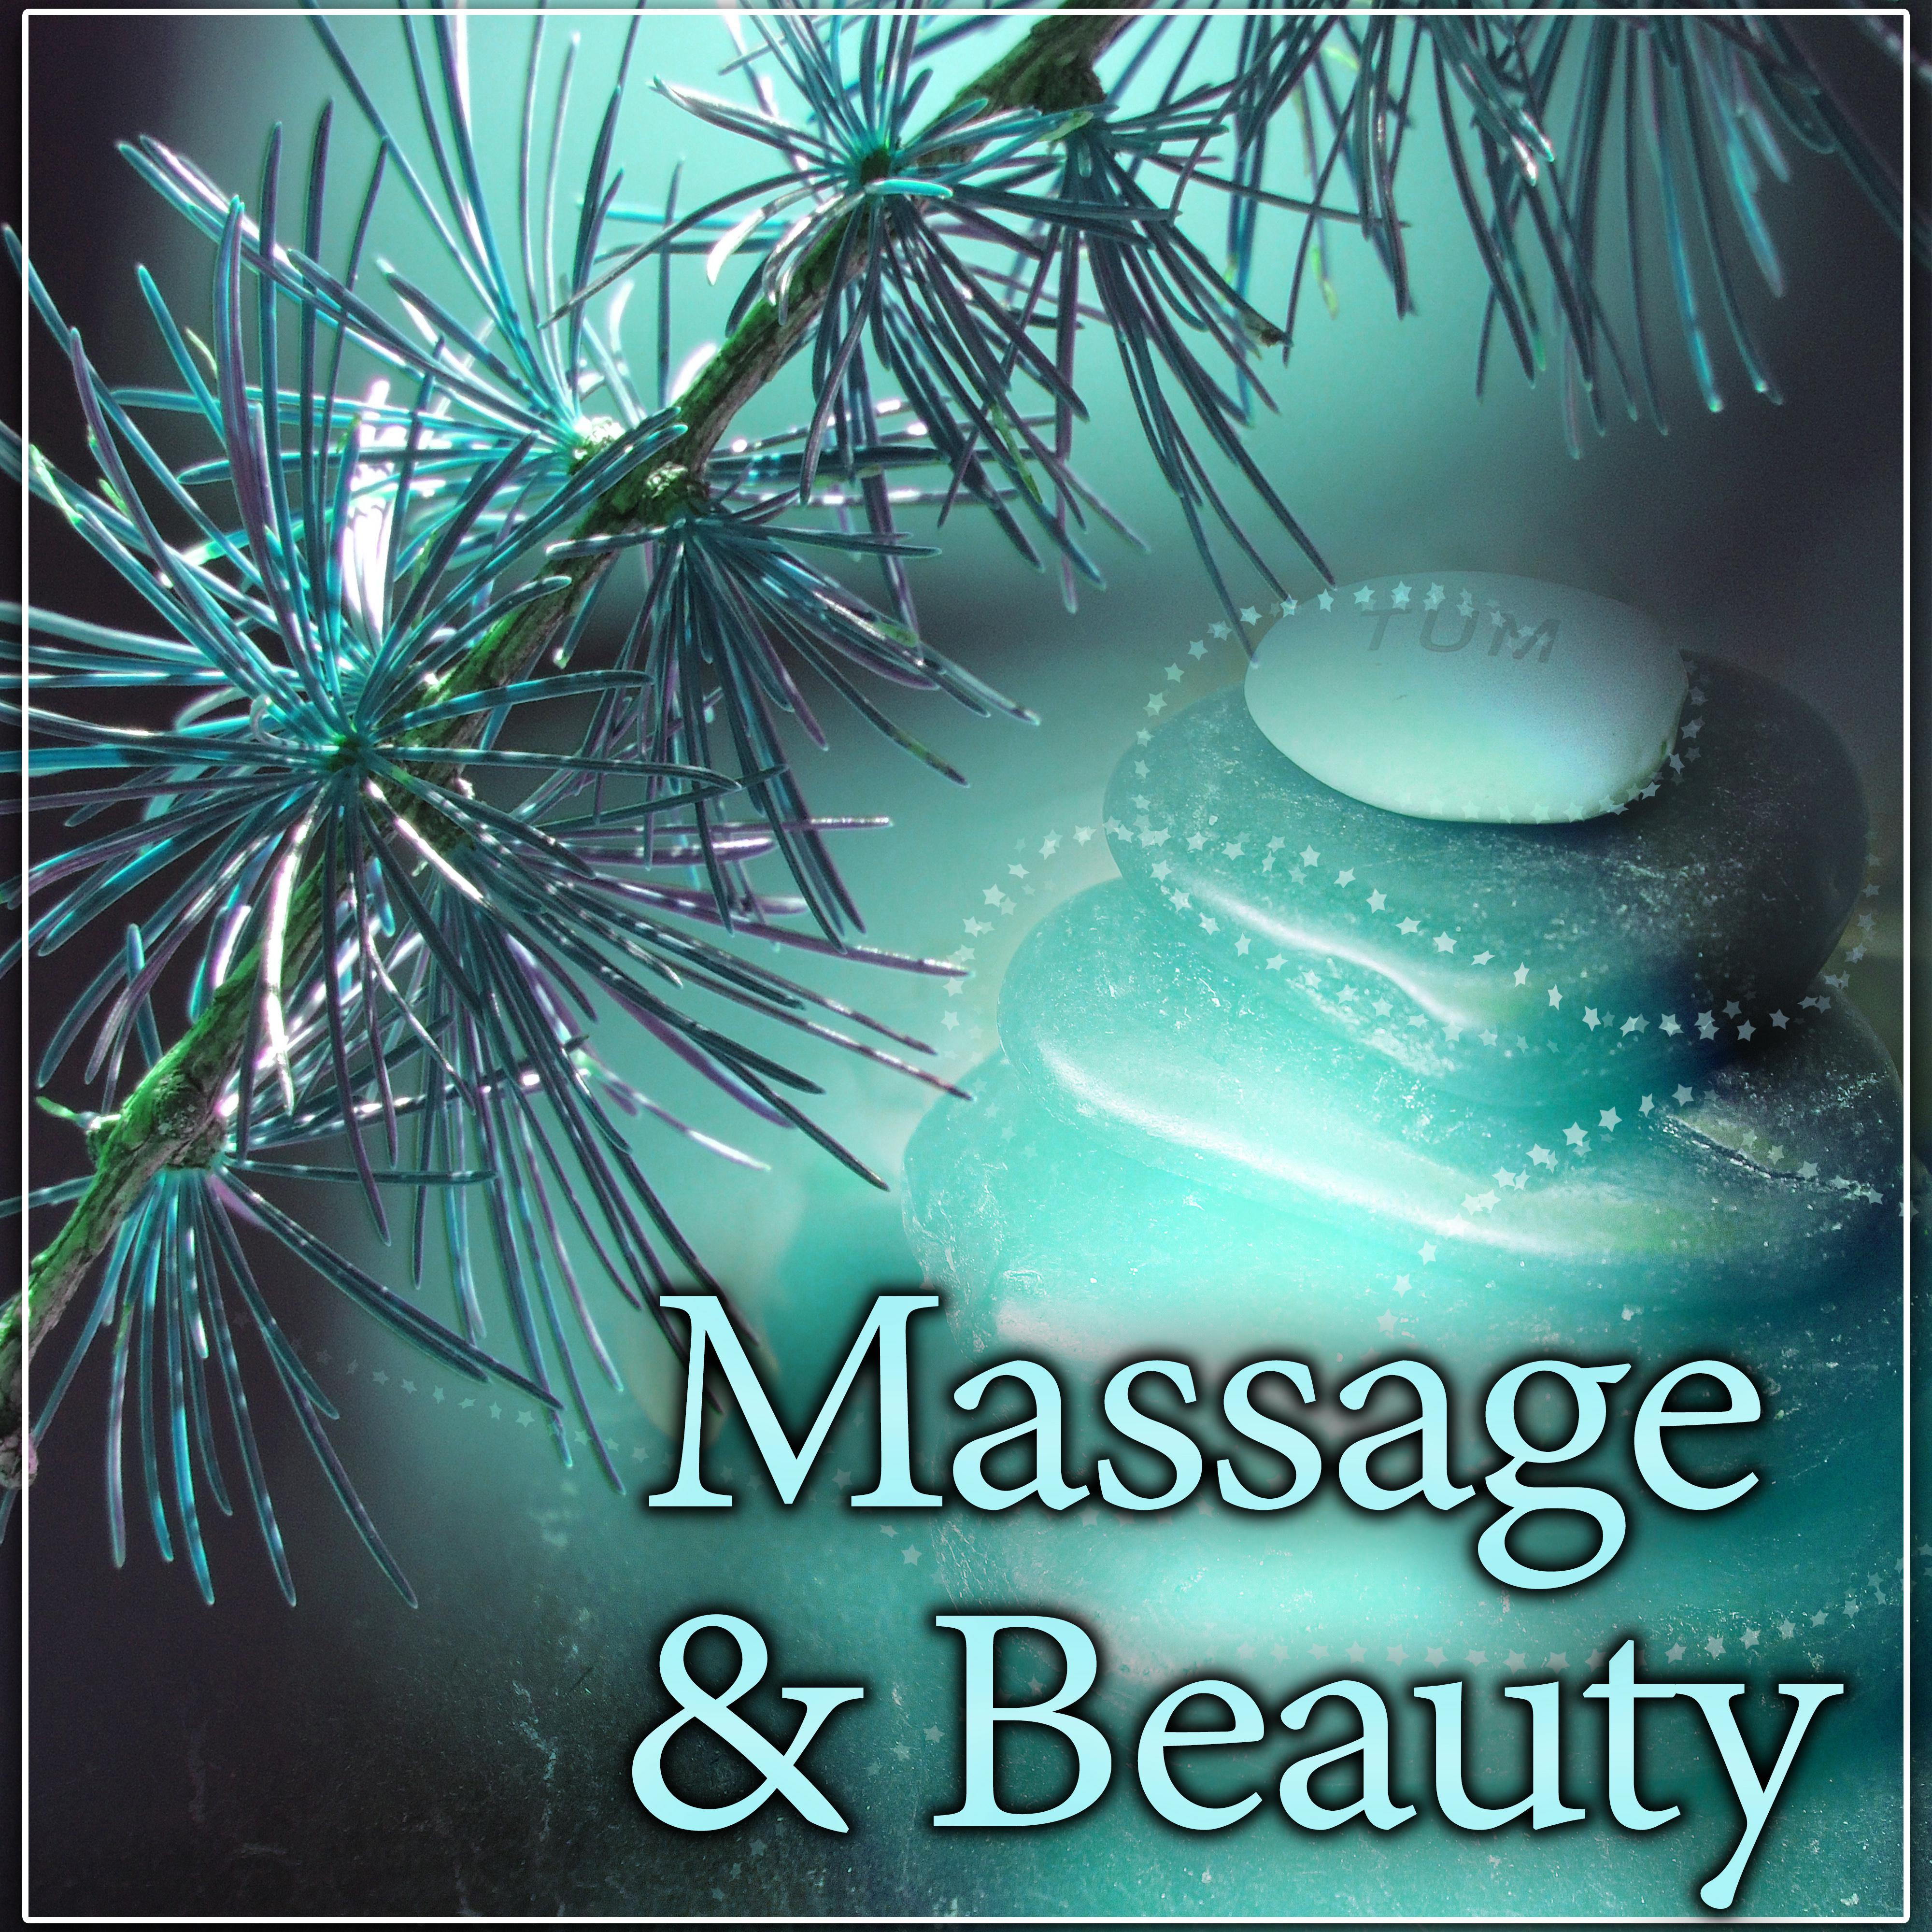 Massage  Beauty  New Age Sounds for Spa  Wellness, Deep Relaxation, Healing Nature Sounds for Classic Massage, Hot Stone Massage